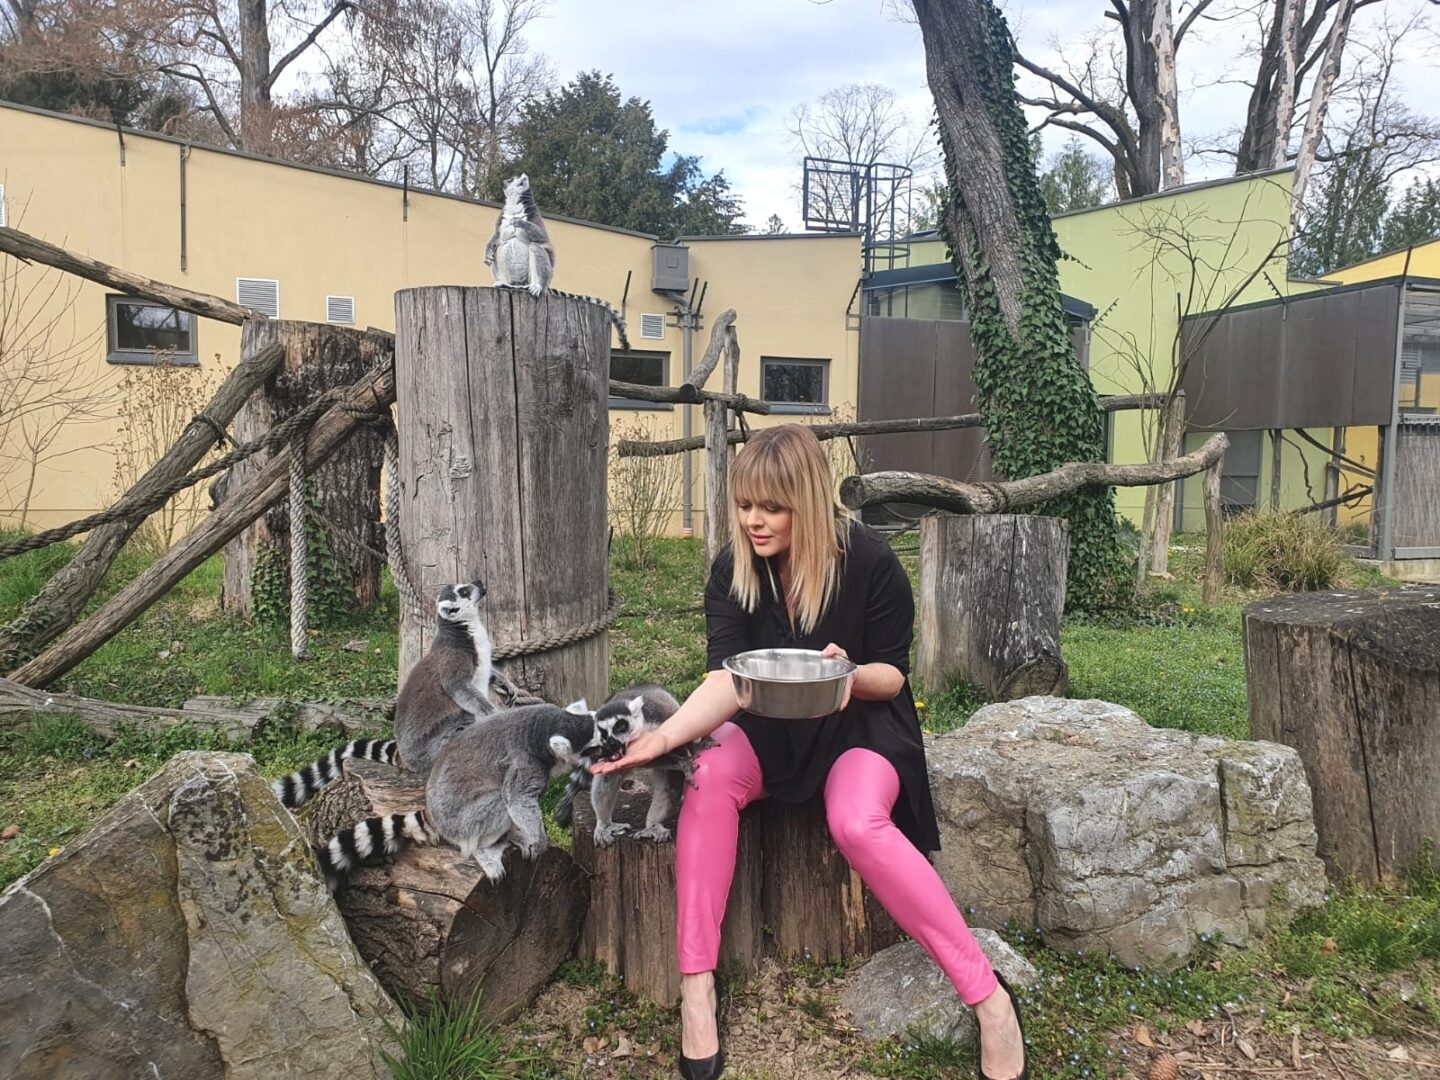 Zagreb Zoo gets its own anthem 'Zoo Song'